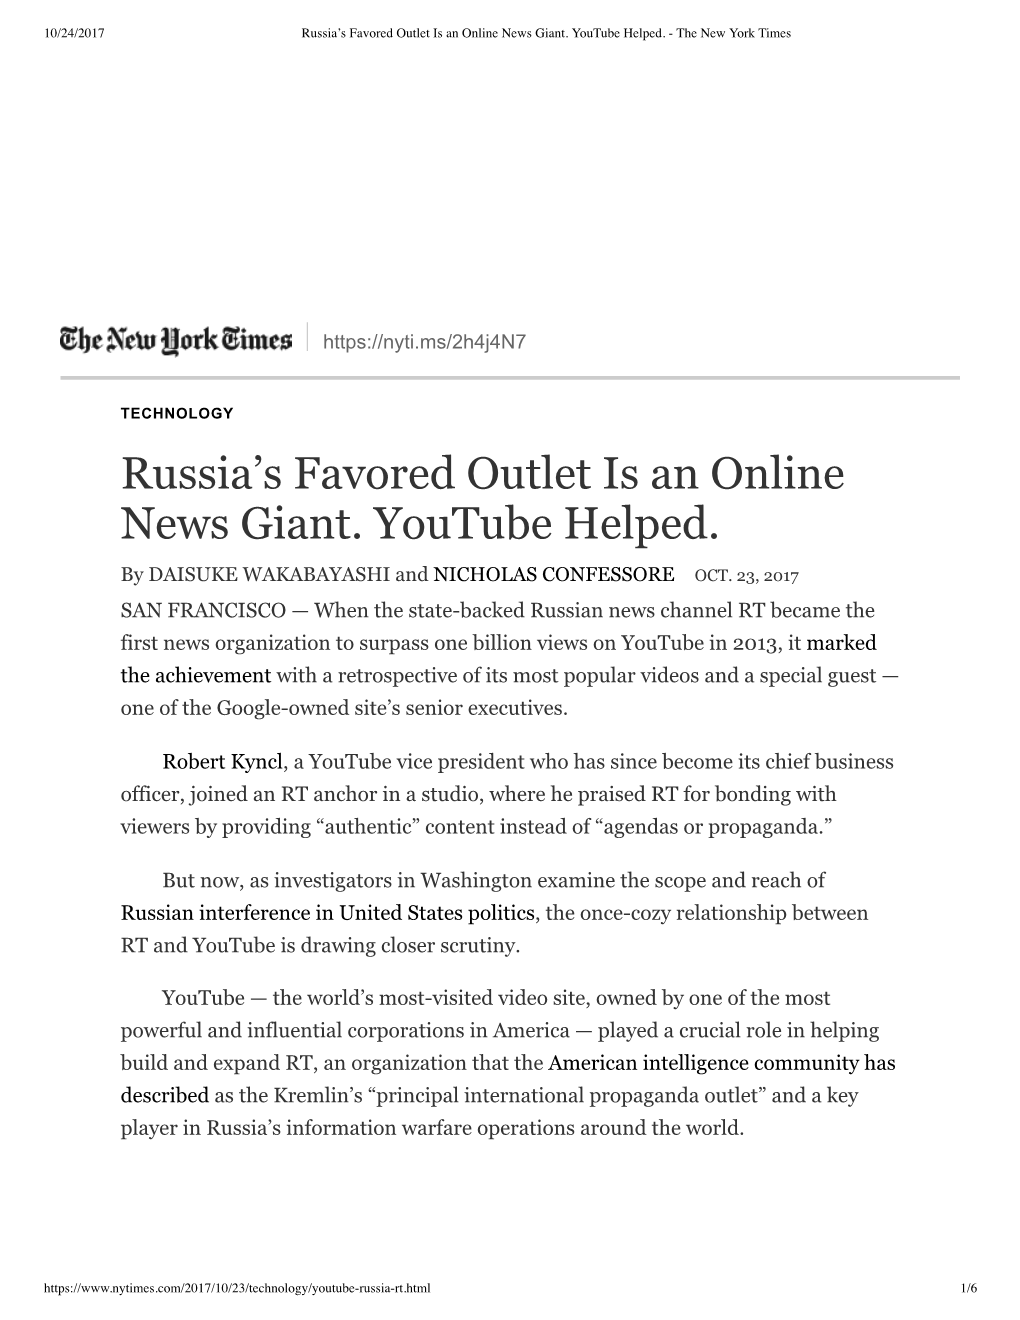 Russia's Favored Outlet Is an Online News Giant. Youtube Helped